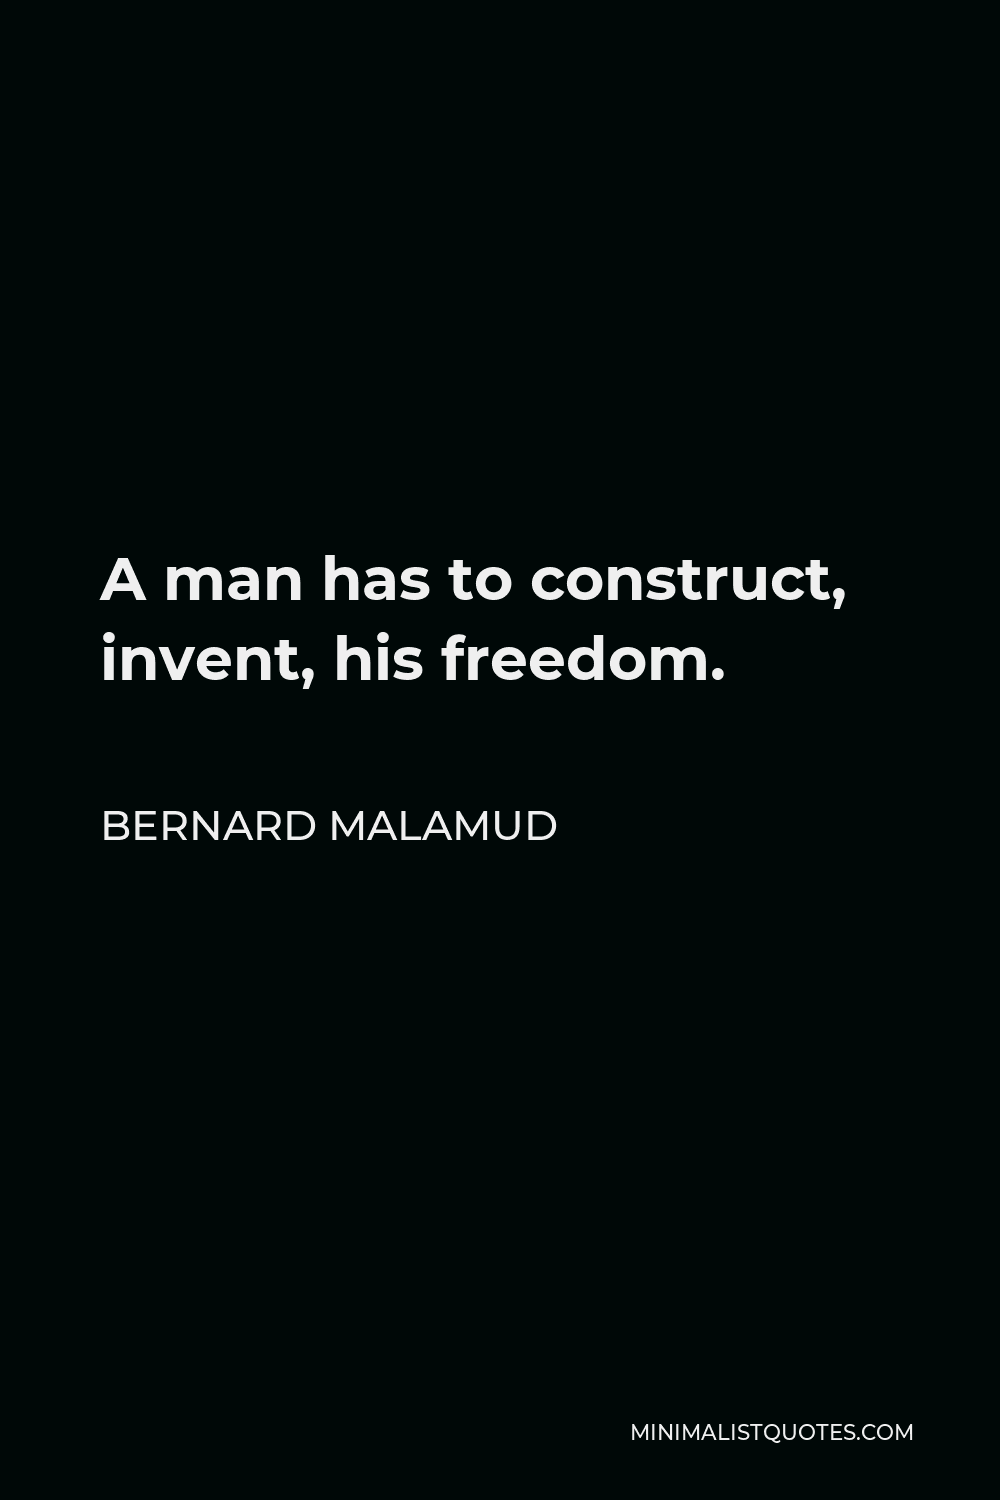 Bernard Malamud Quote - A man has to construct, invent, his freedom.